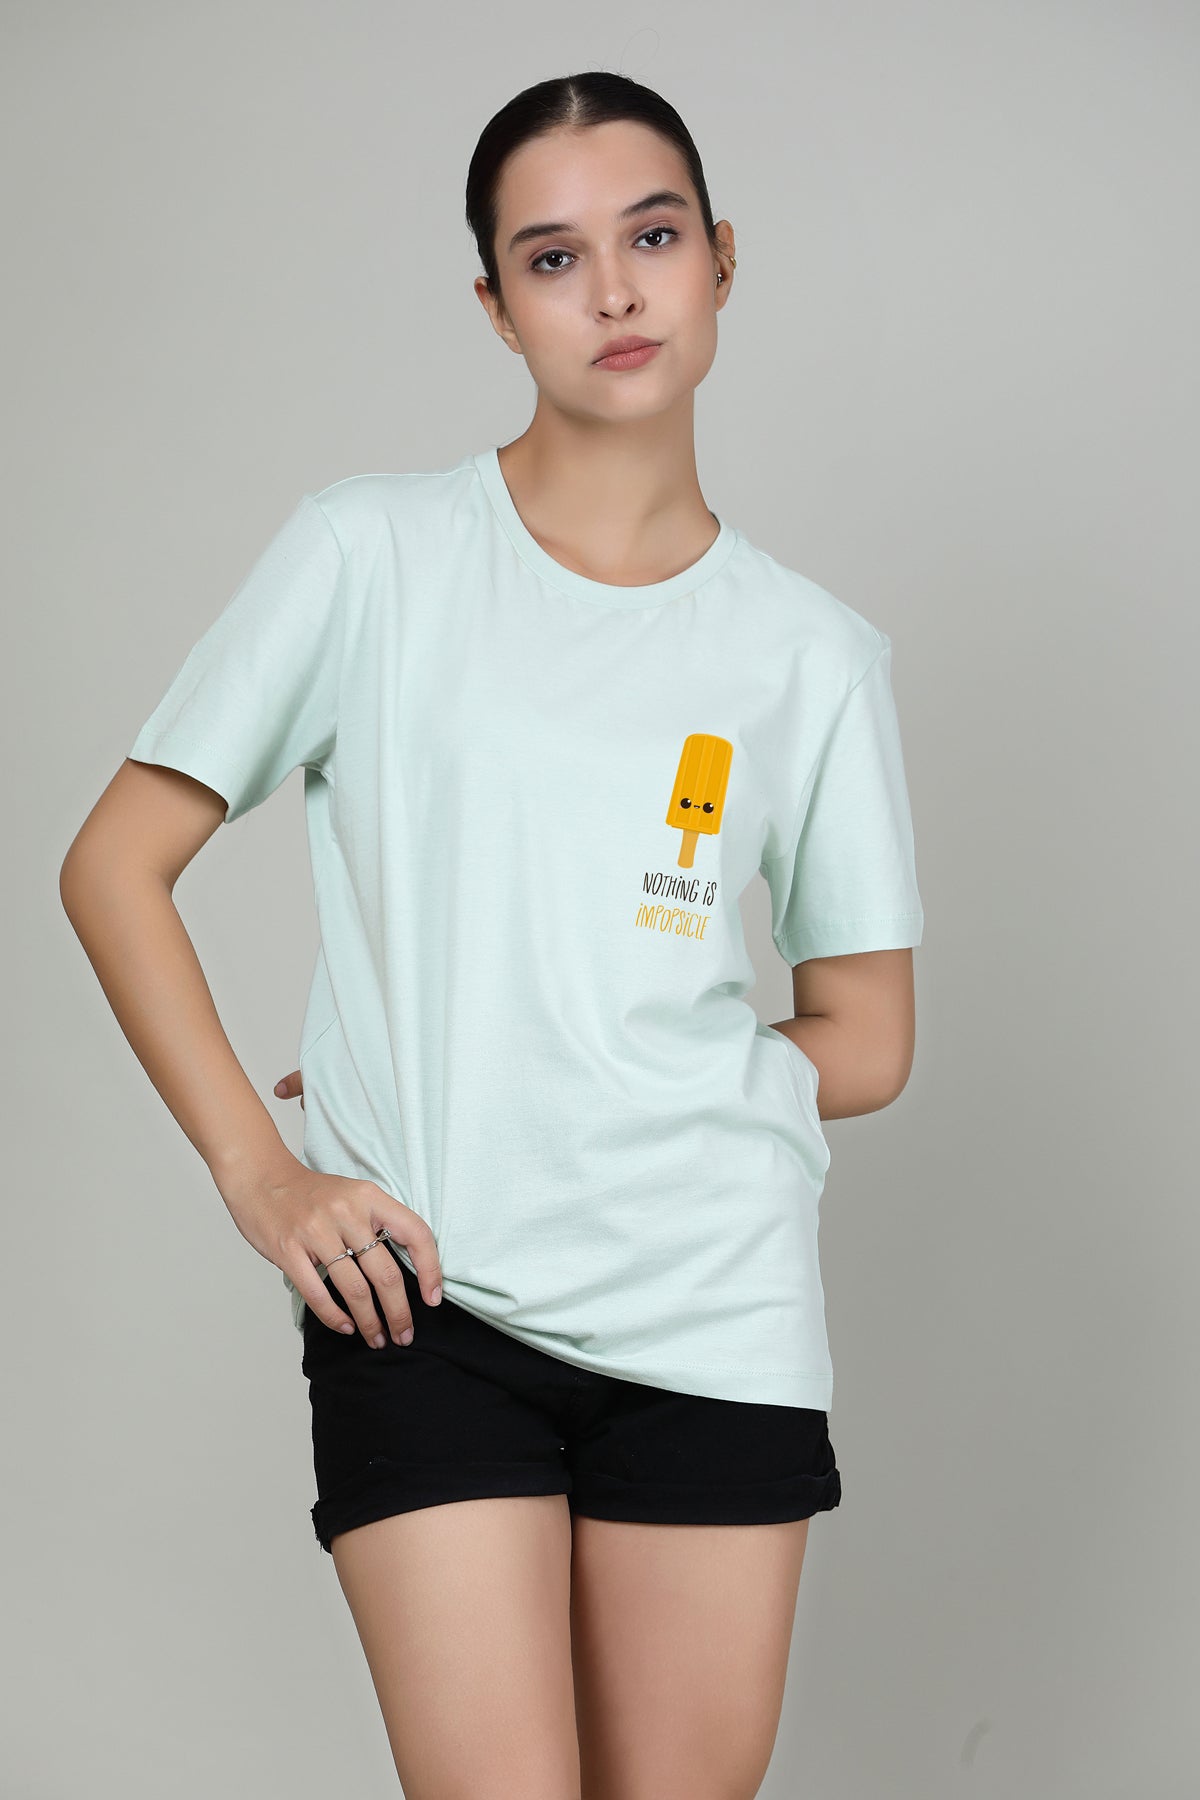 Nothing impopsicle - Printed Half sleeves T- Shirt